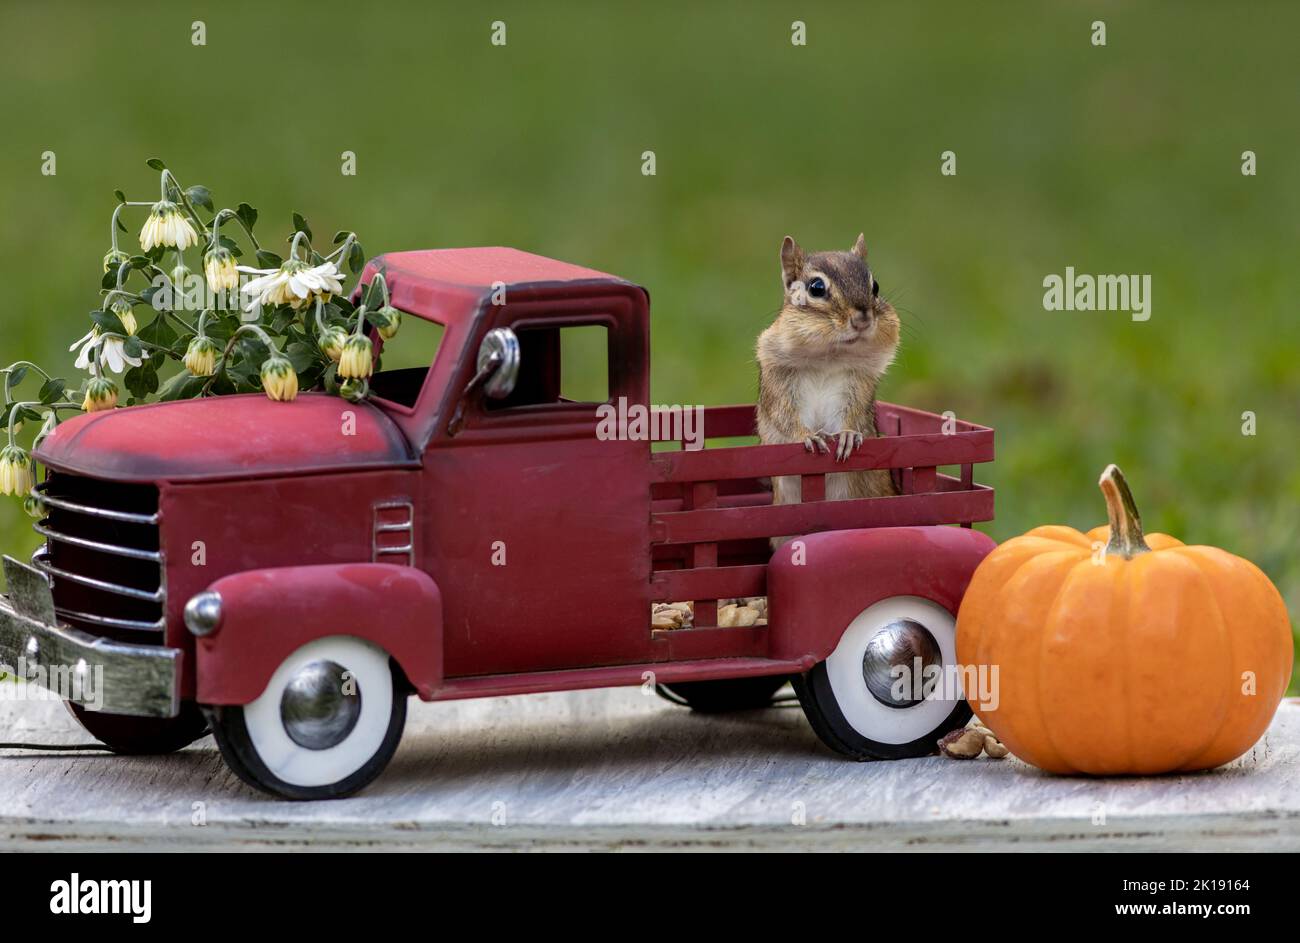 Adorable Eastern Chipmunk searches for snacks in Fall Autumn scene with classic red truck and pumpkin Stock Photo